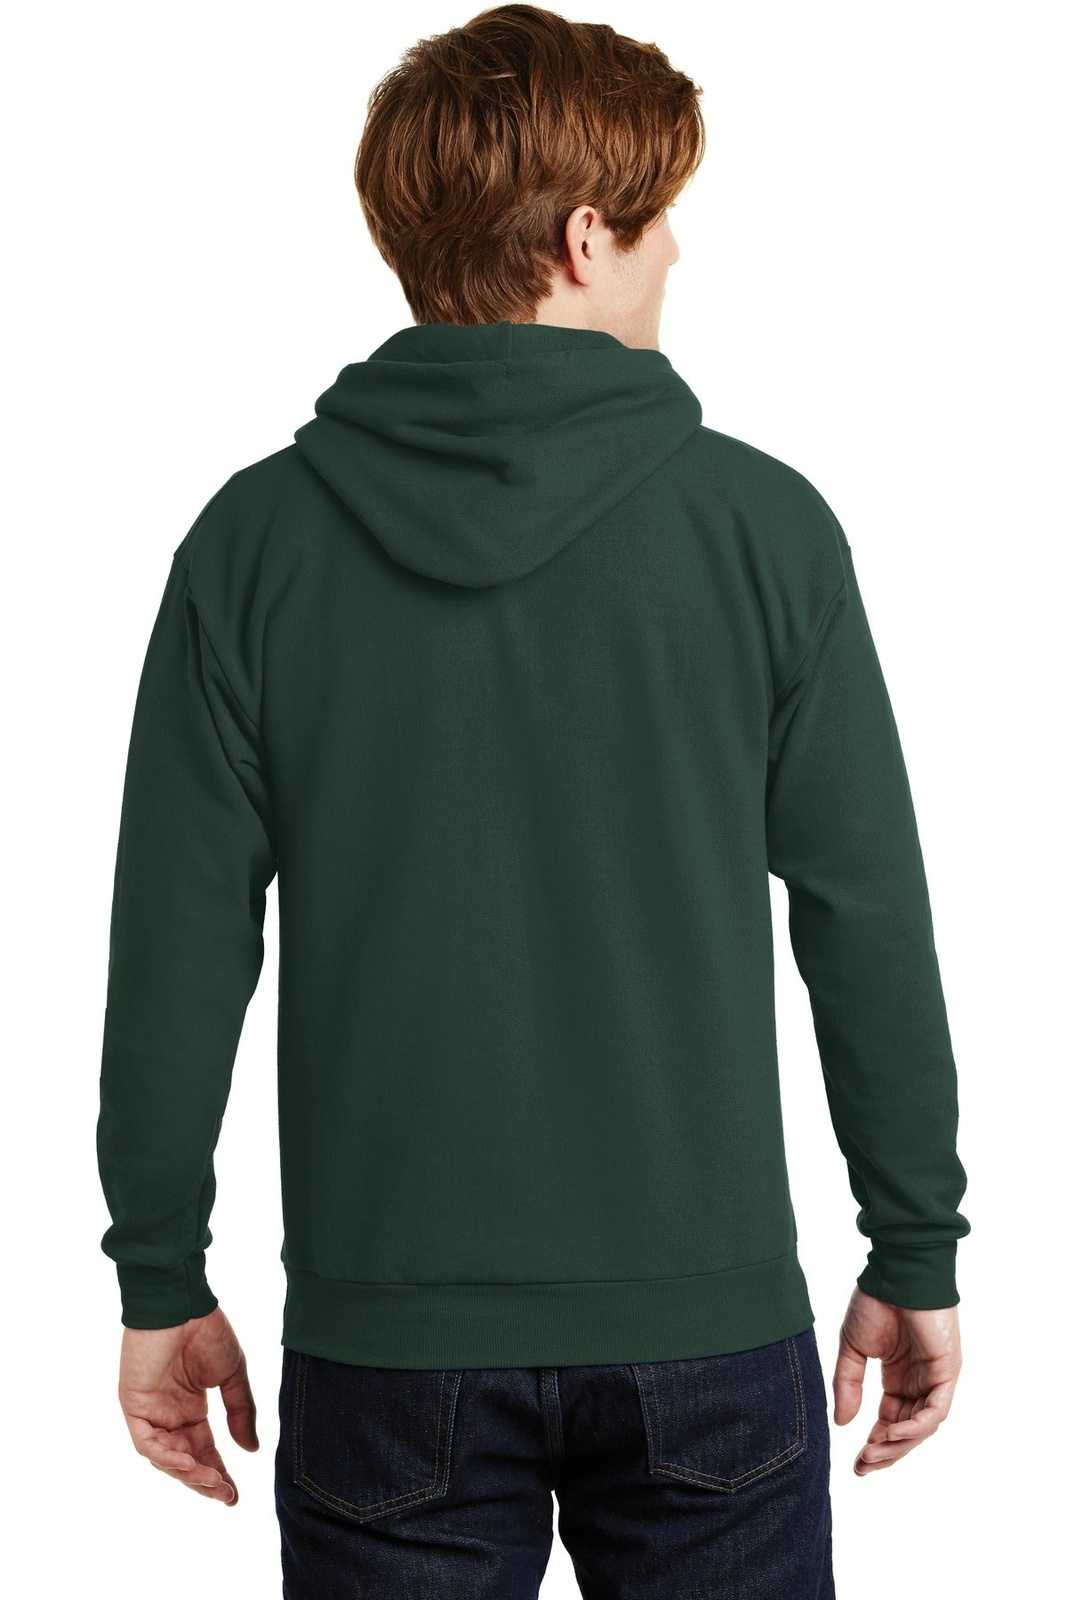 Hanes P170 Ecosmart Pullover Hooded Sweatshirt - Deep Forest - HIT a Double